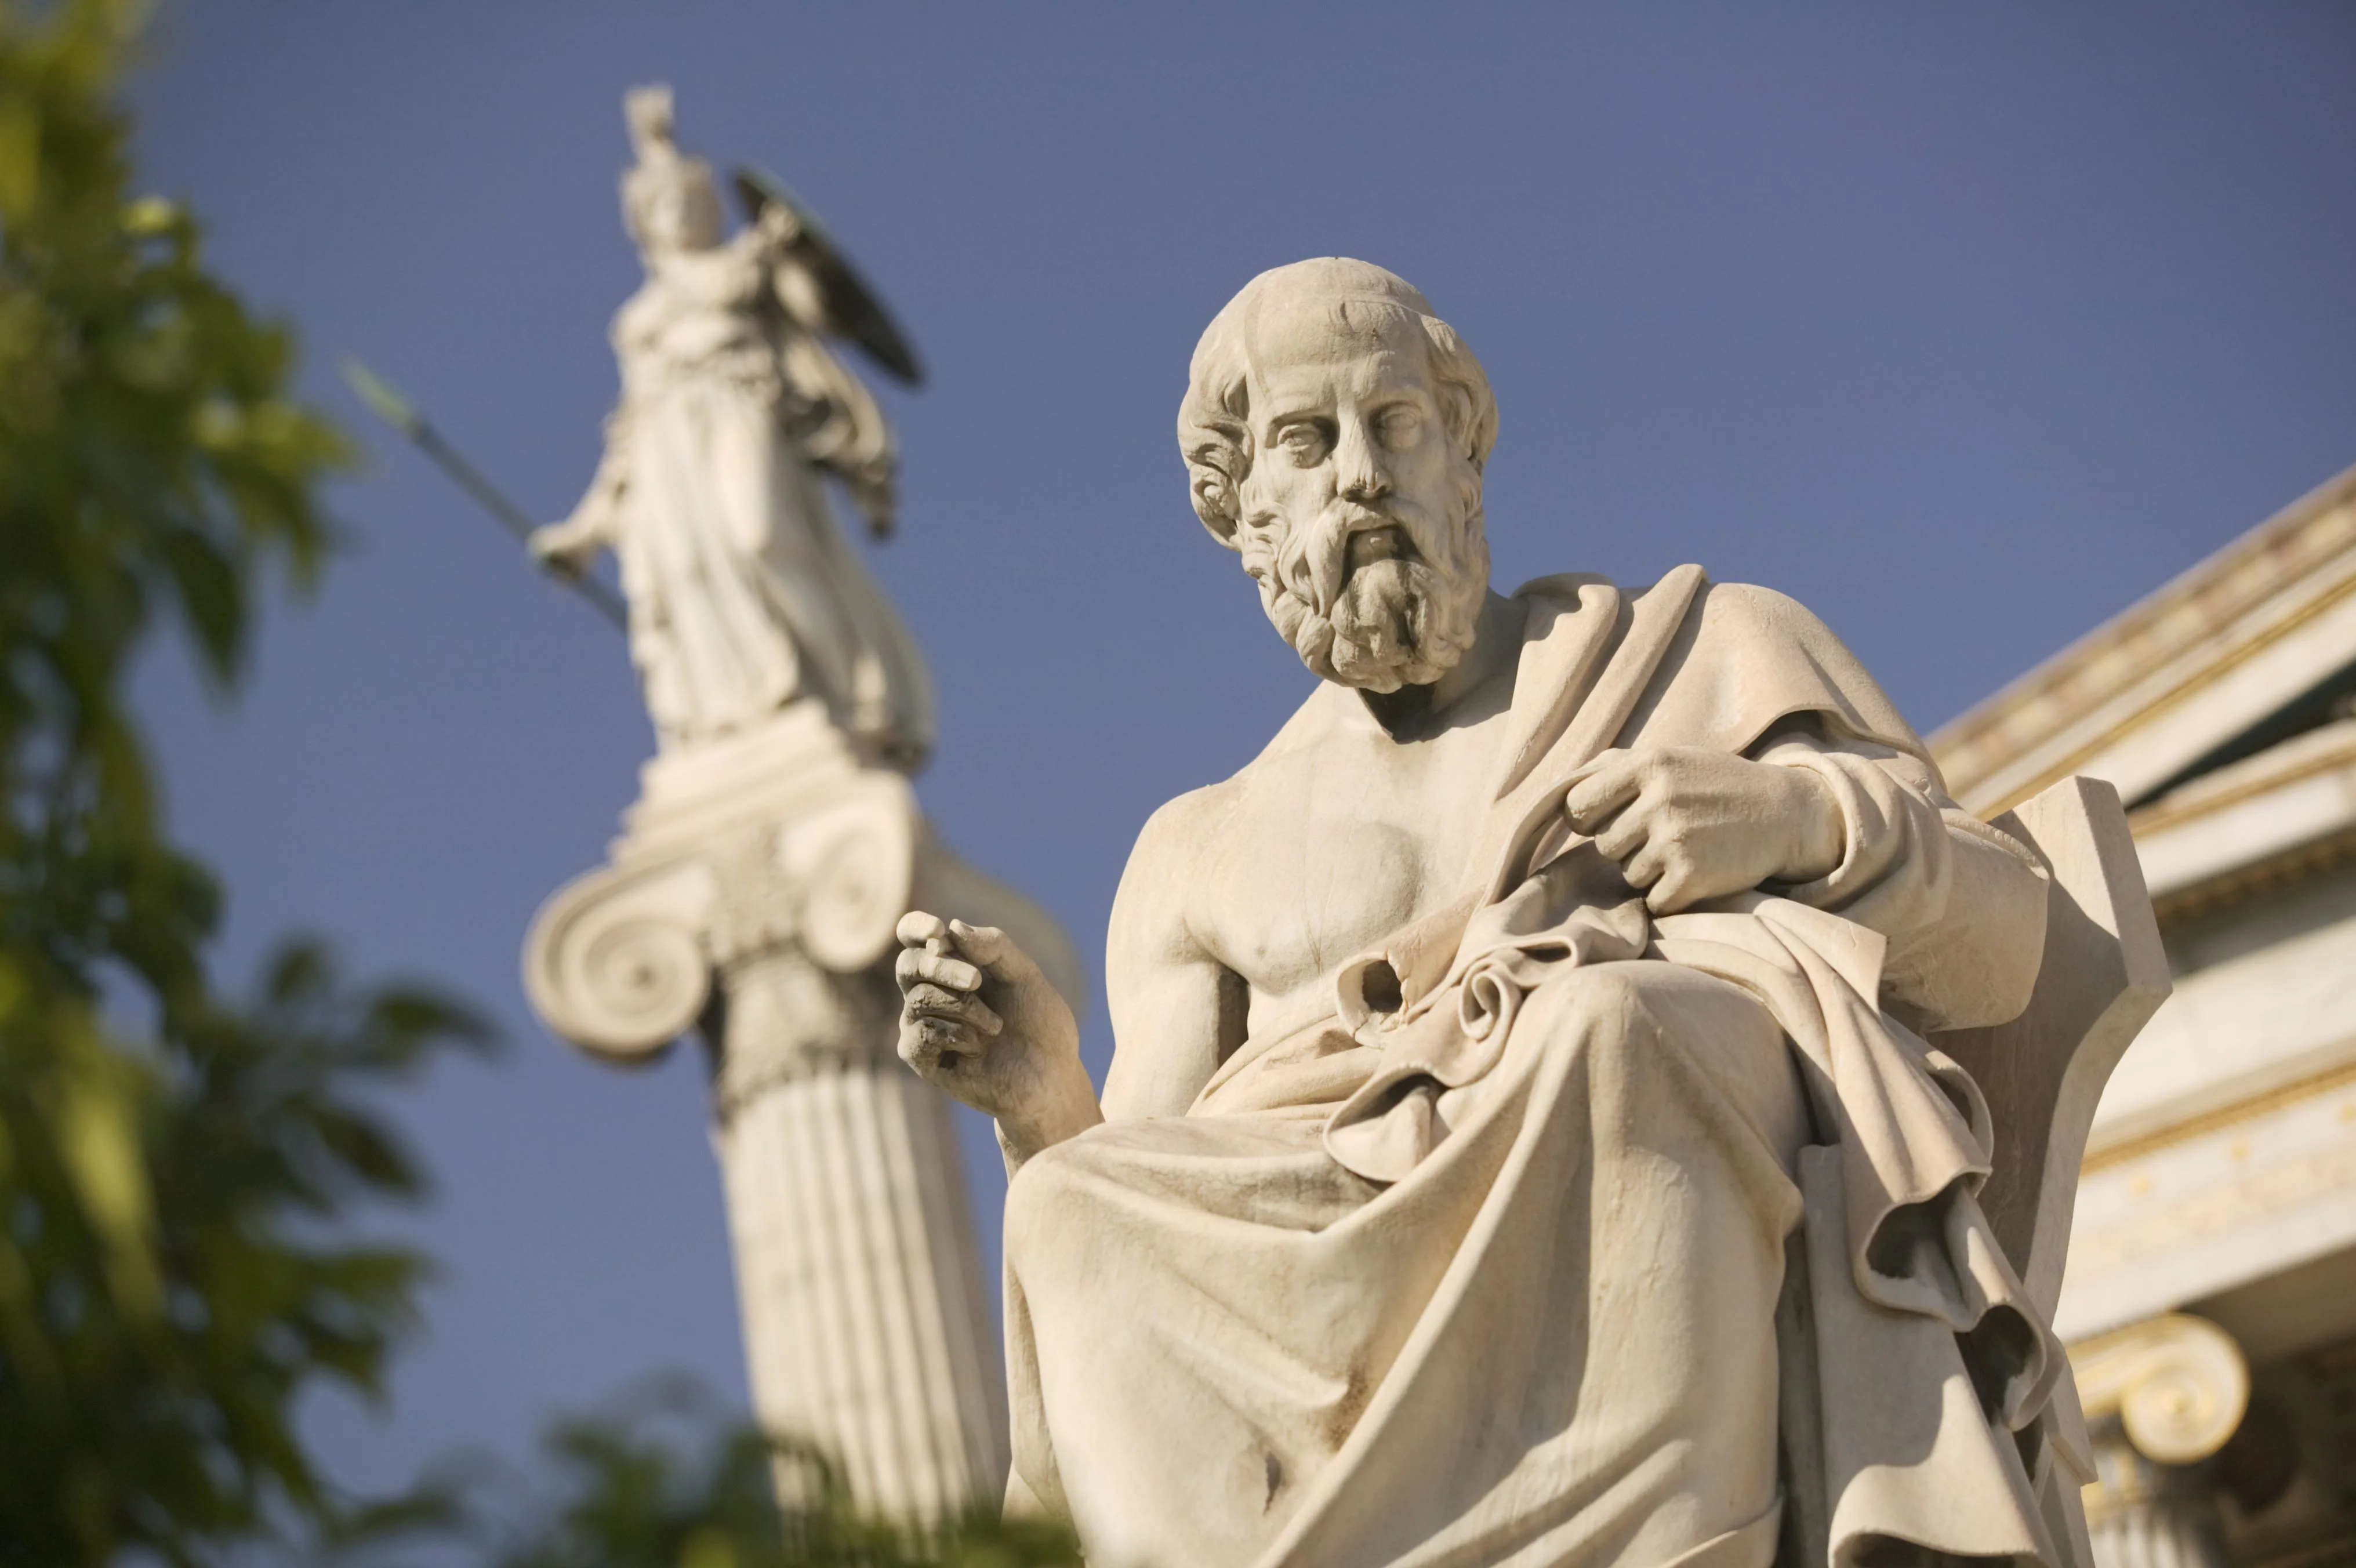 plato-statue-outside-the-hellenic-academy-520346492-589ceaab3df78c475875af25